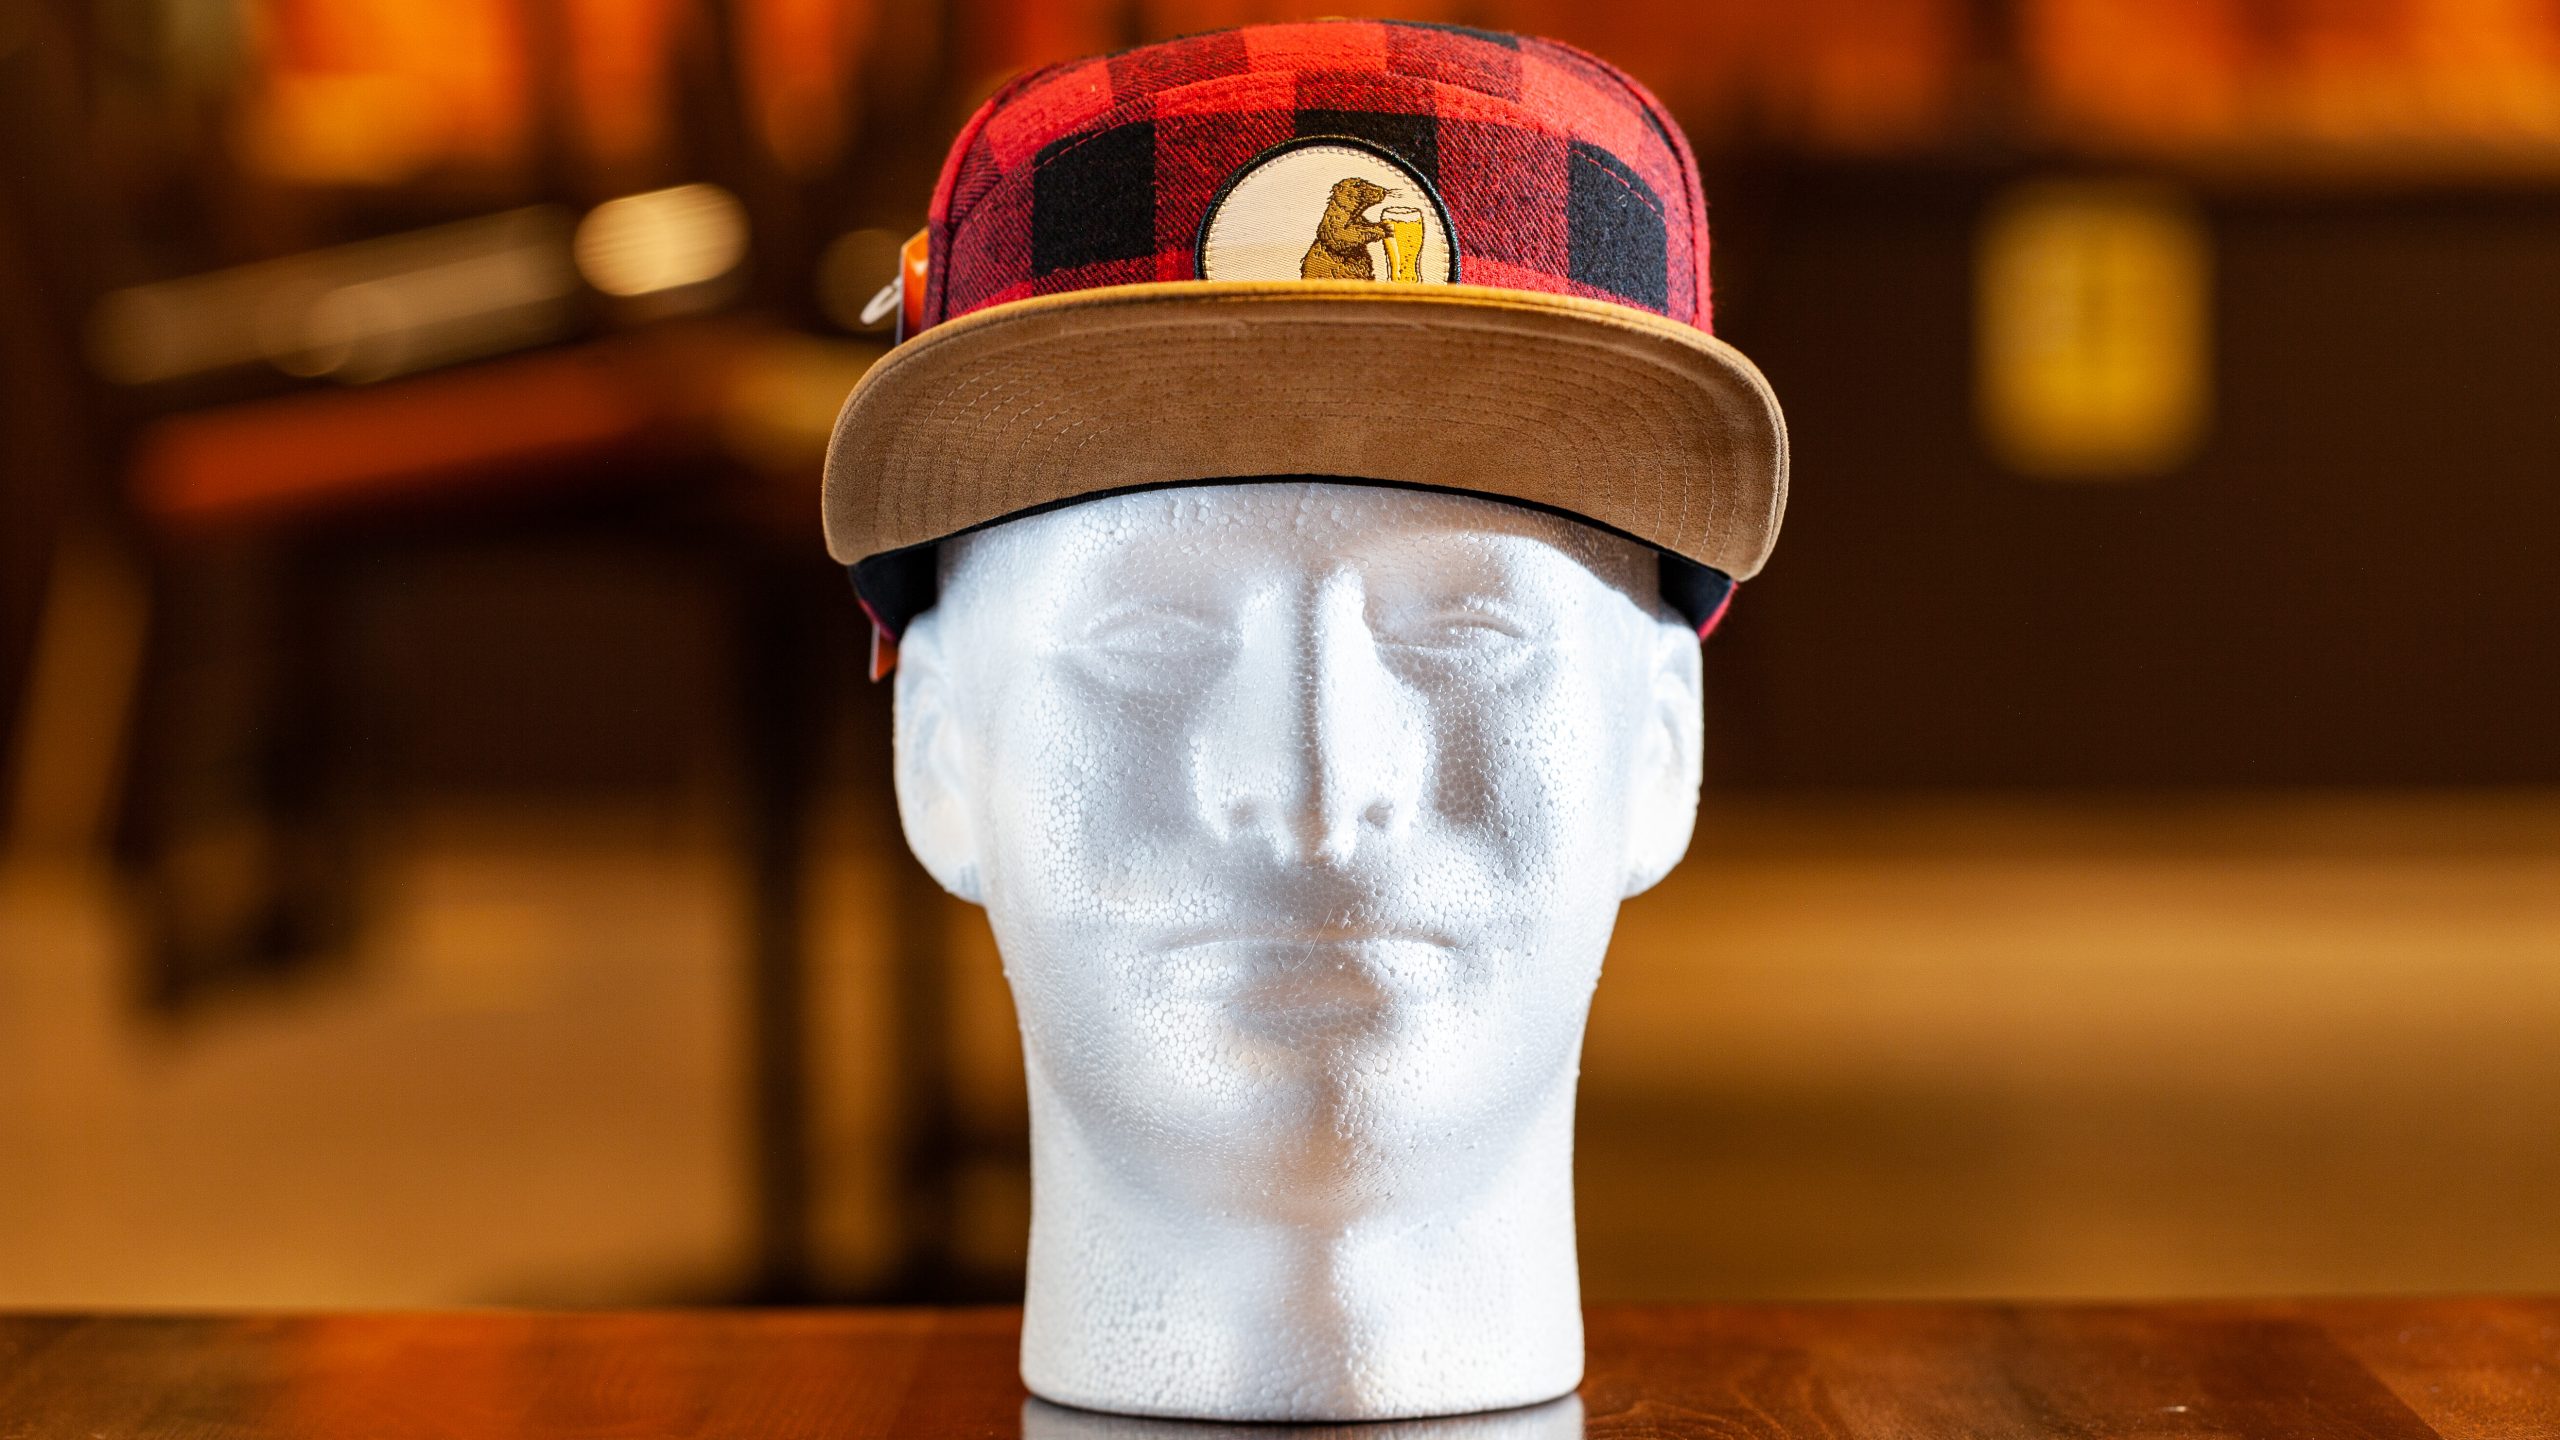 A Prairie Dog Brewing branded red and black Buffalo-check (plaid) hat, made by Pukka. The hat features our mascot Alby on a round embroidered button. Brown suede brim with snap-back.